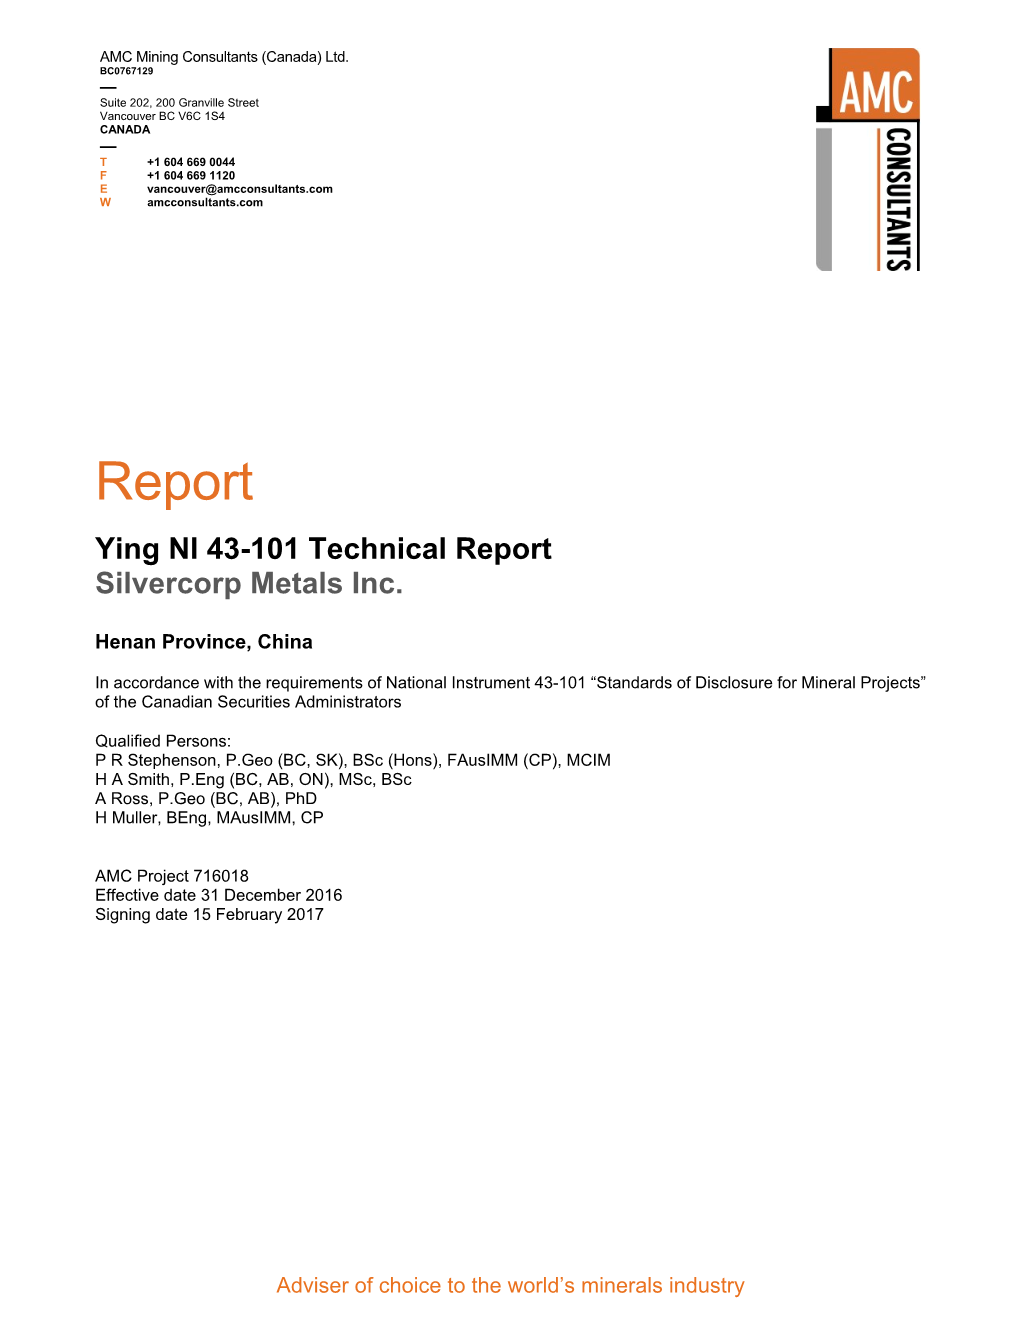 To View Technical Report